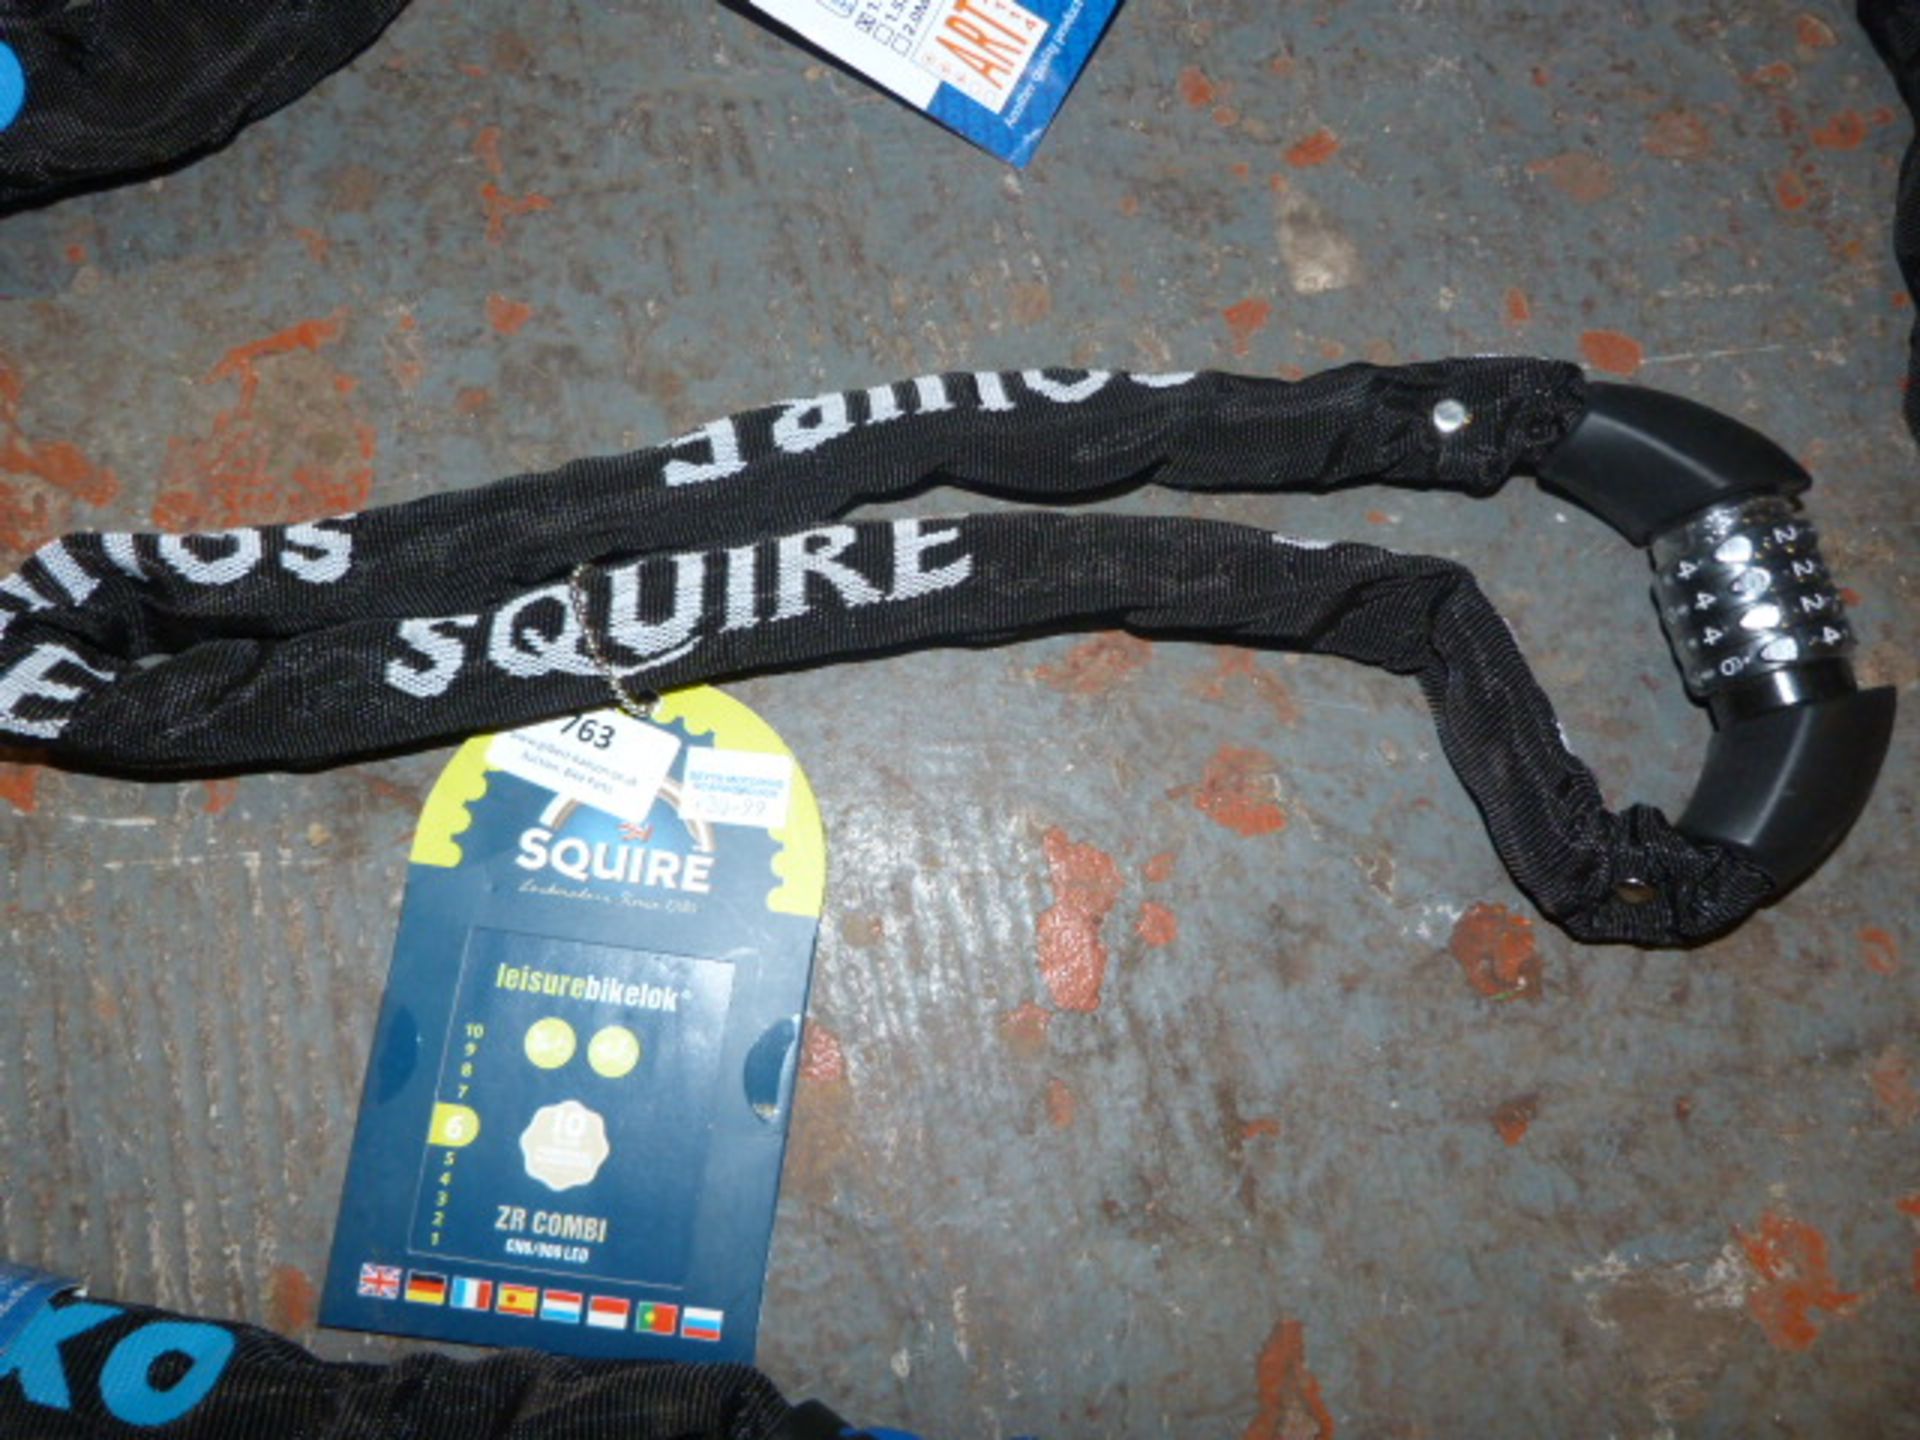 *Squire Security Chain